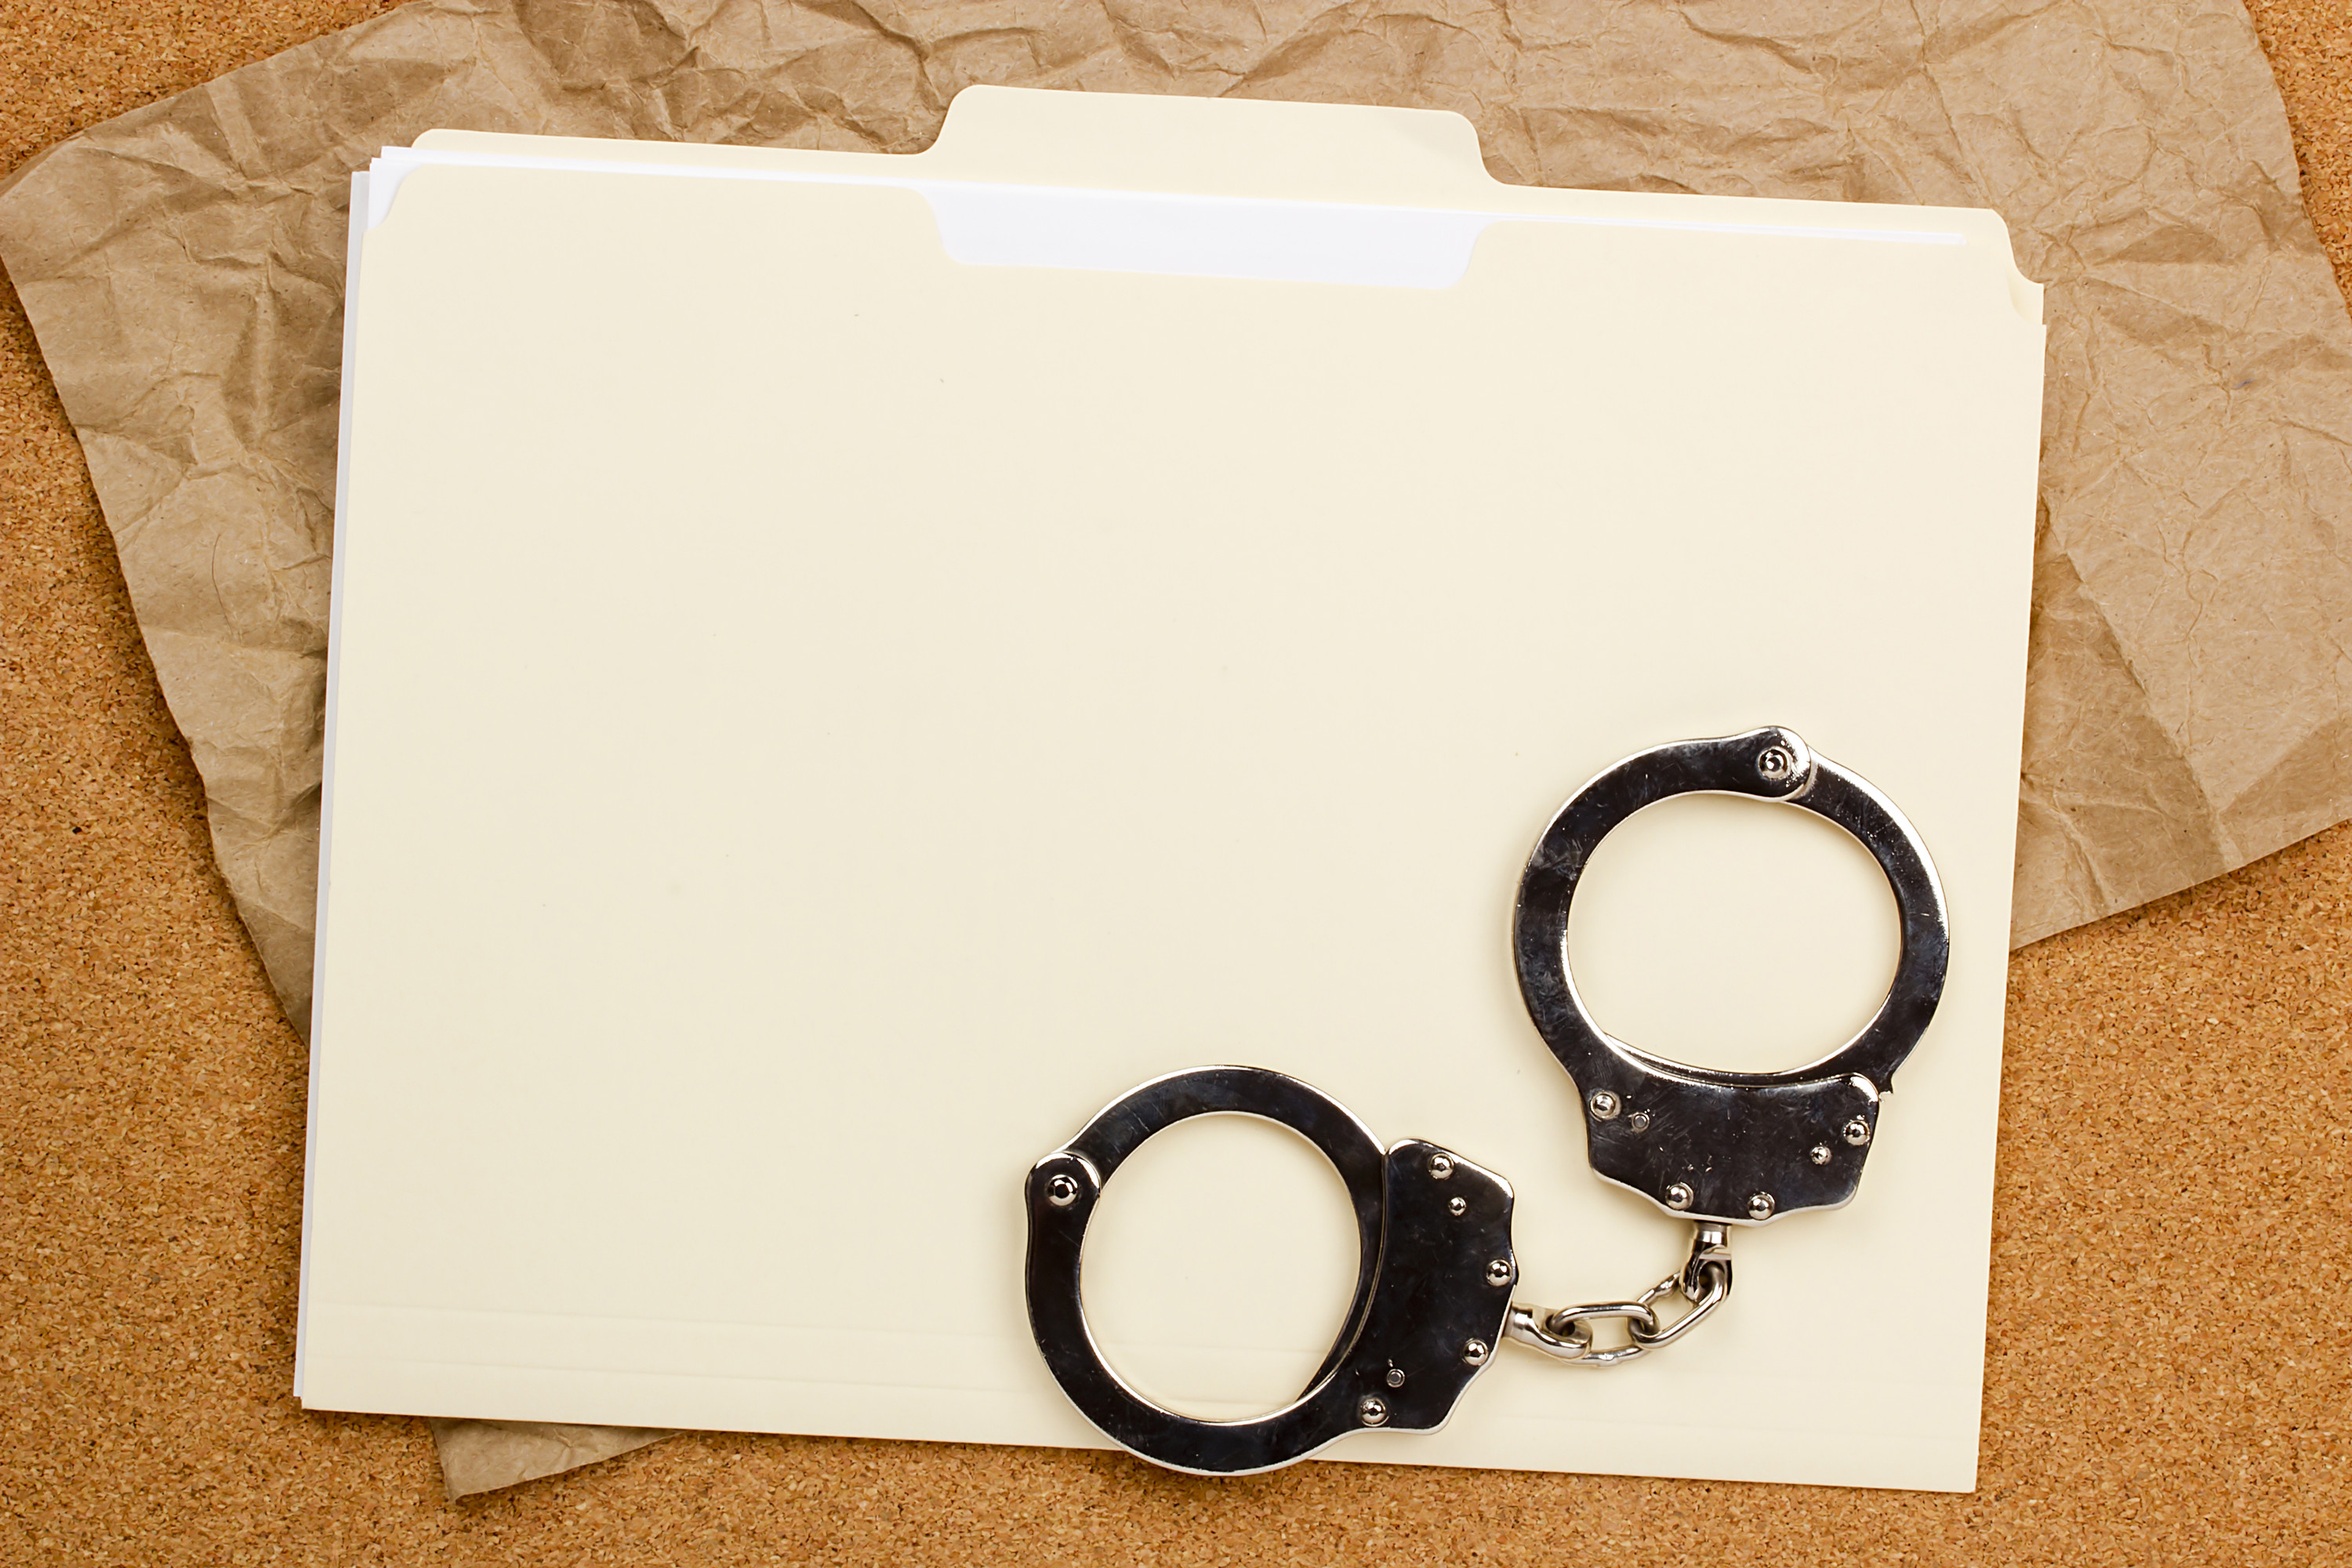 New California Law Allows Arrest Records To Be Sealed Pc